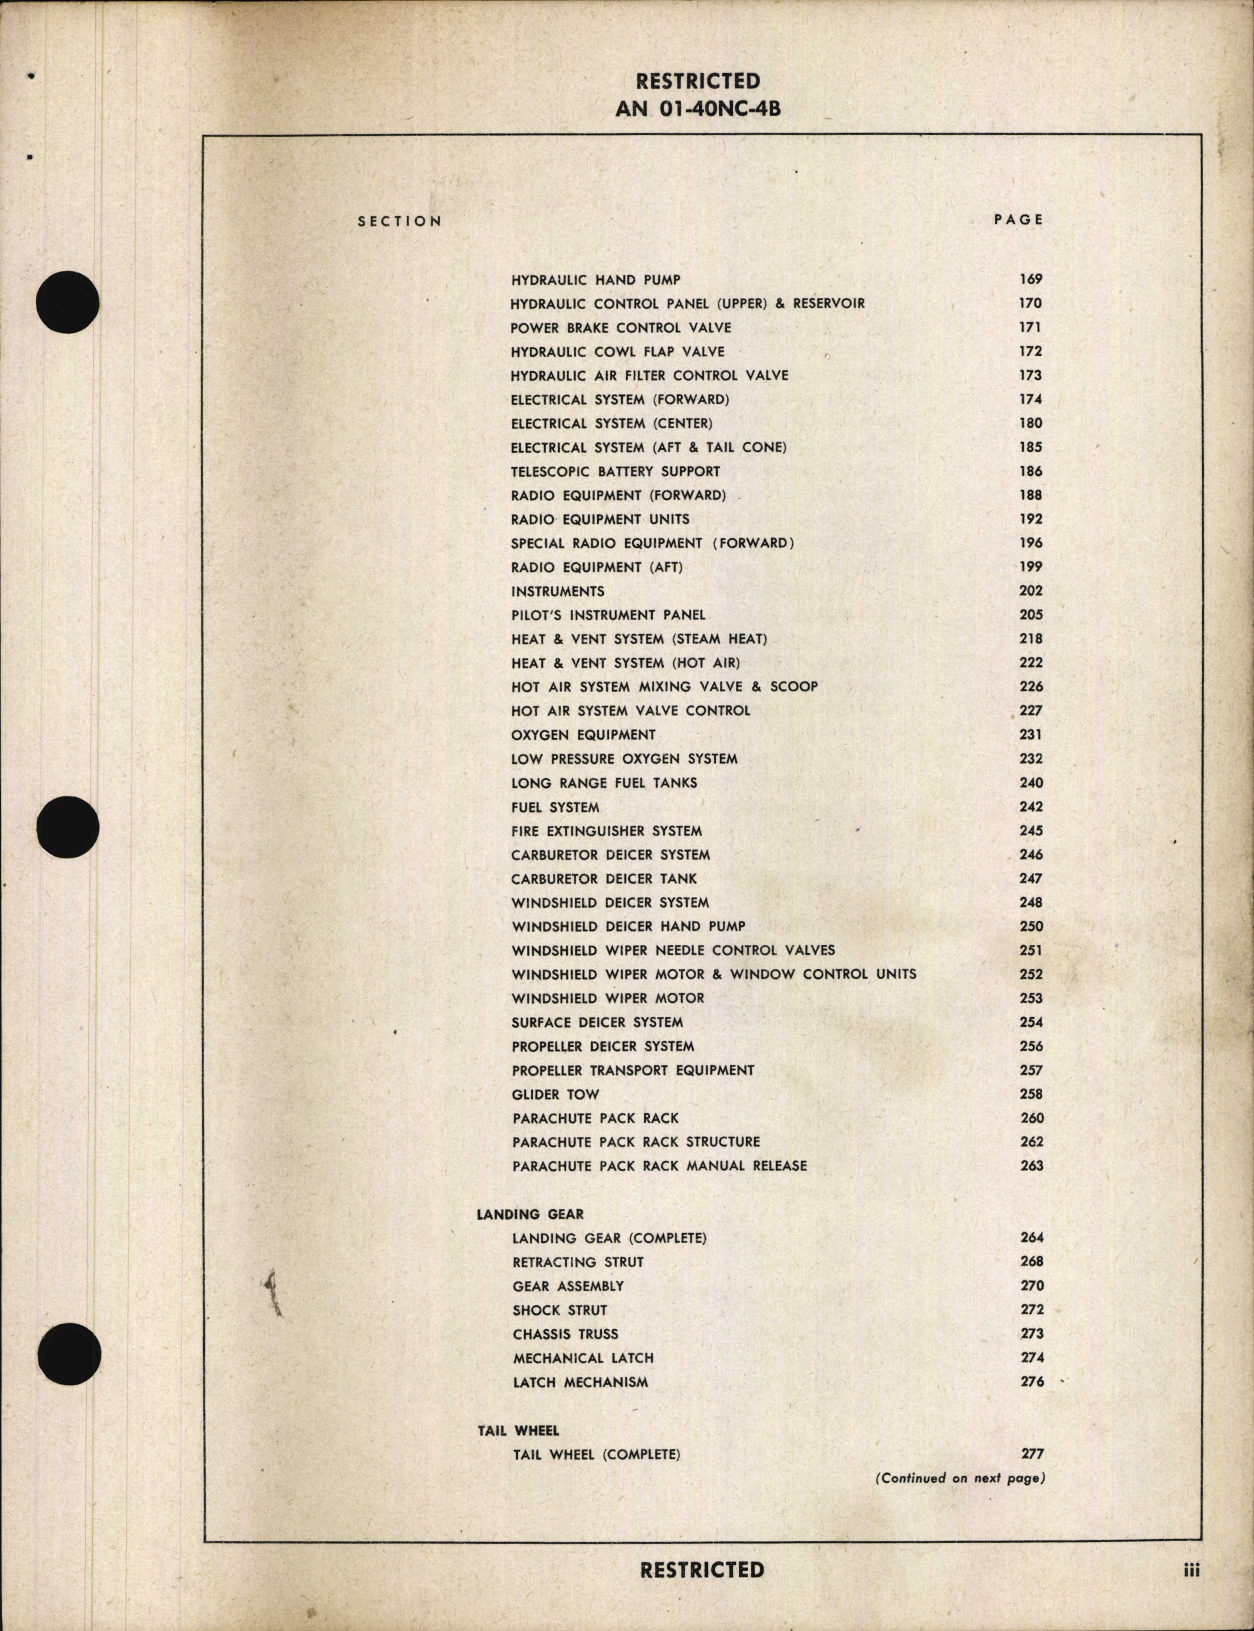 Sample page 7 from AirCorps Library document: Parts Catalog for C-47A and R4D-5